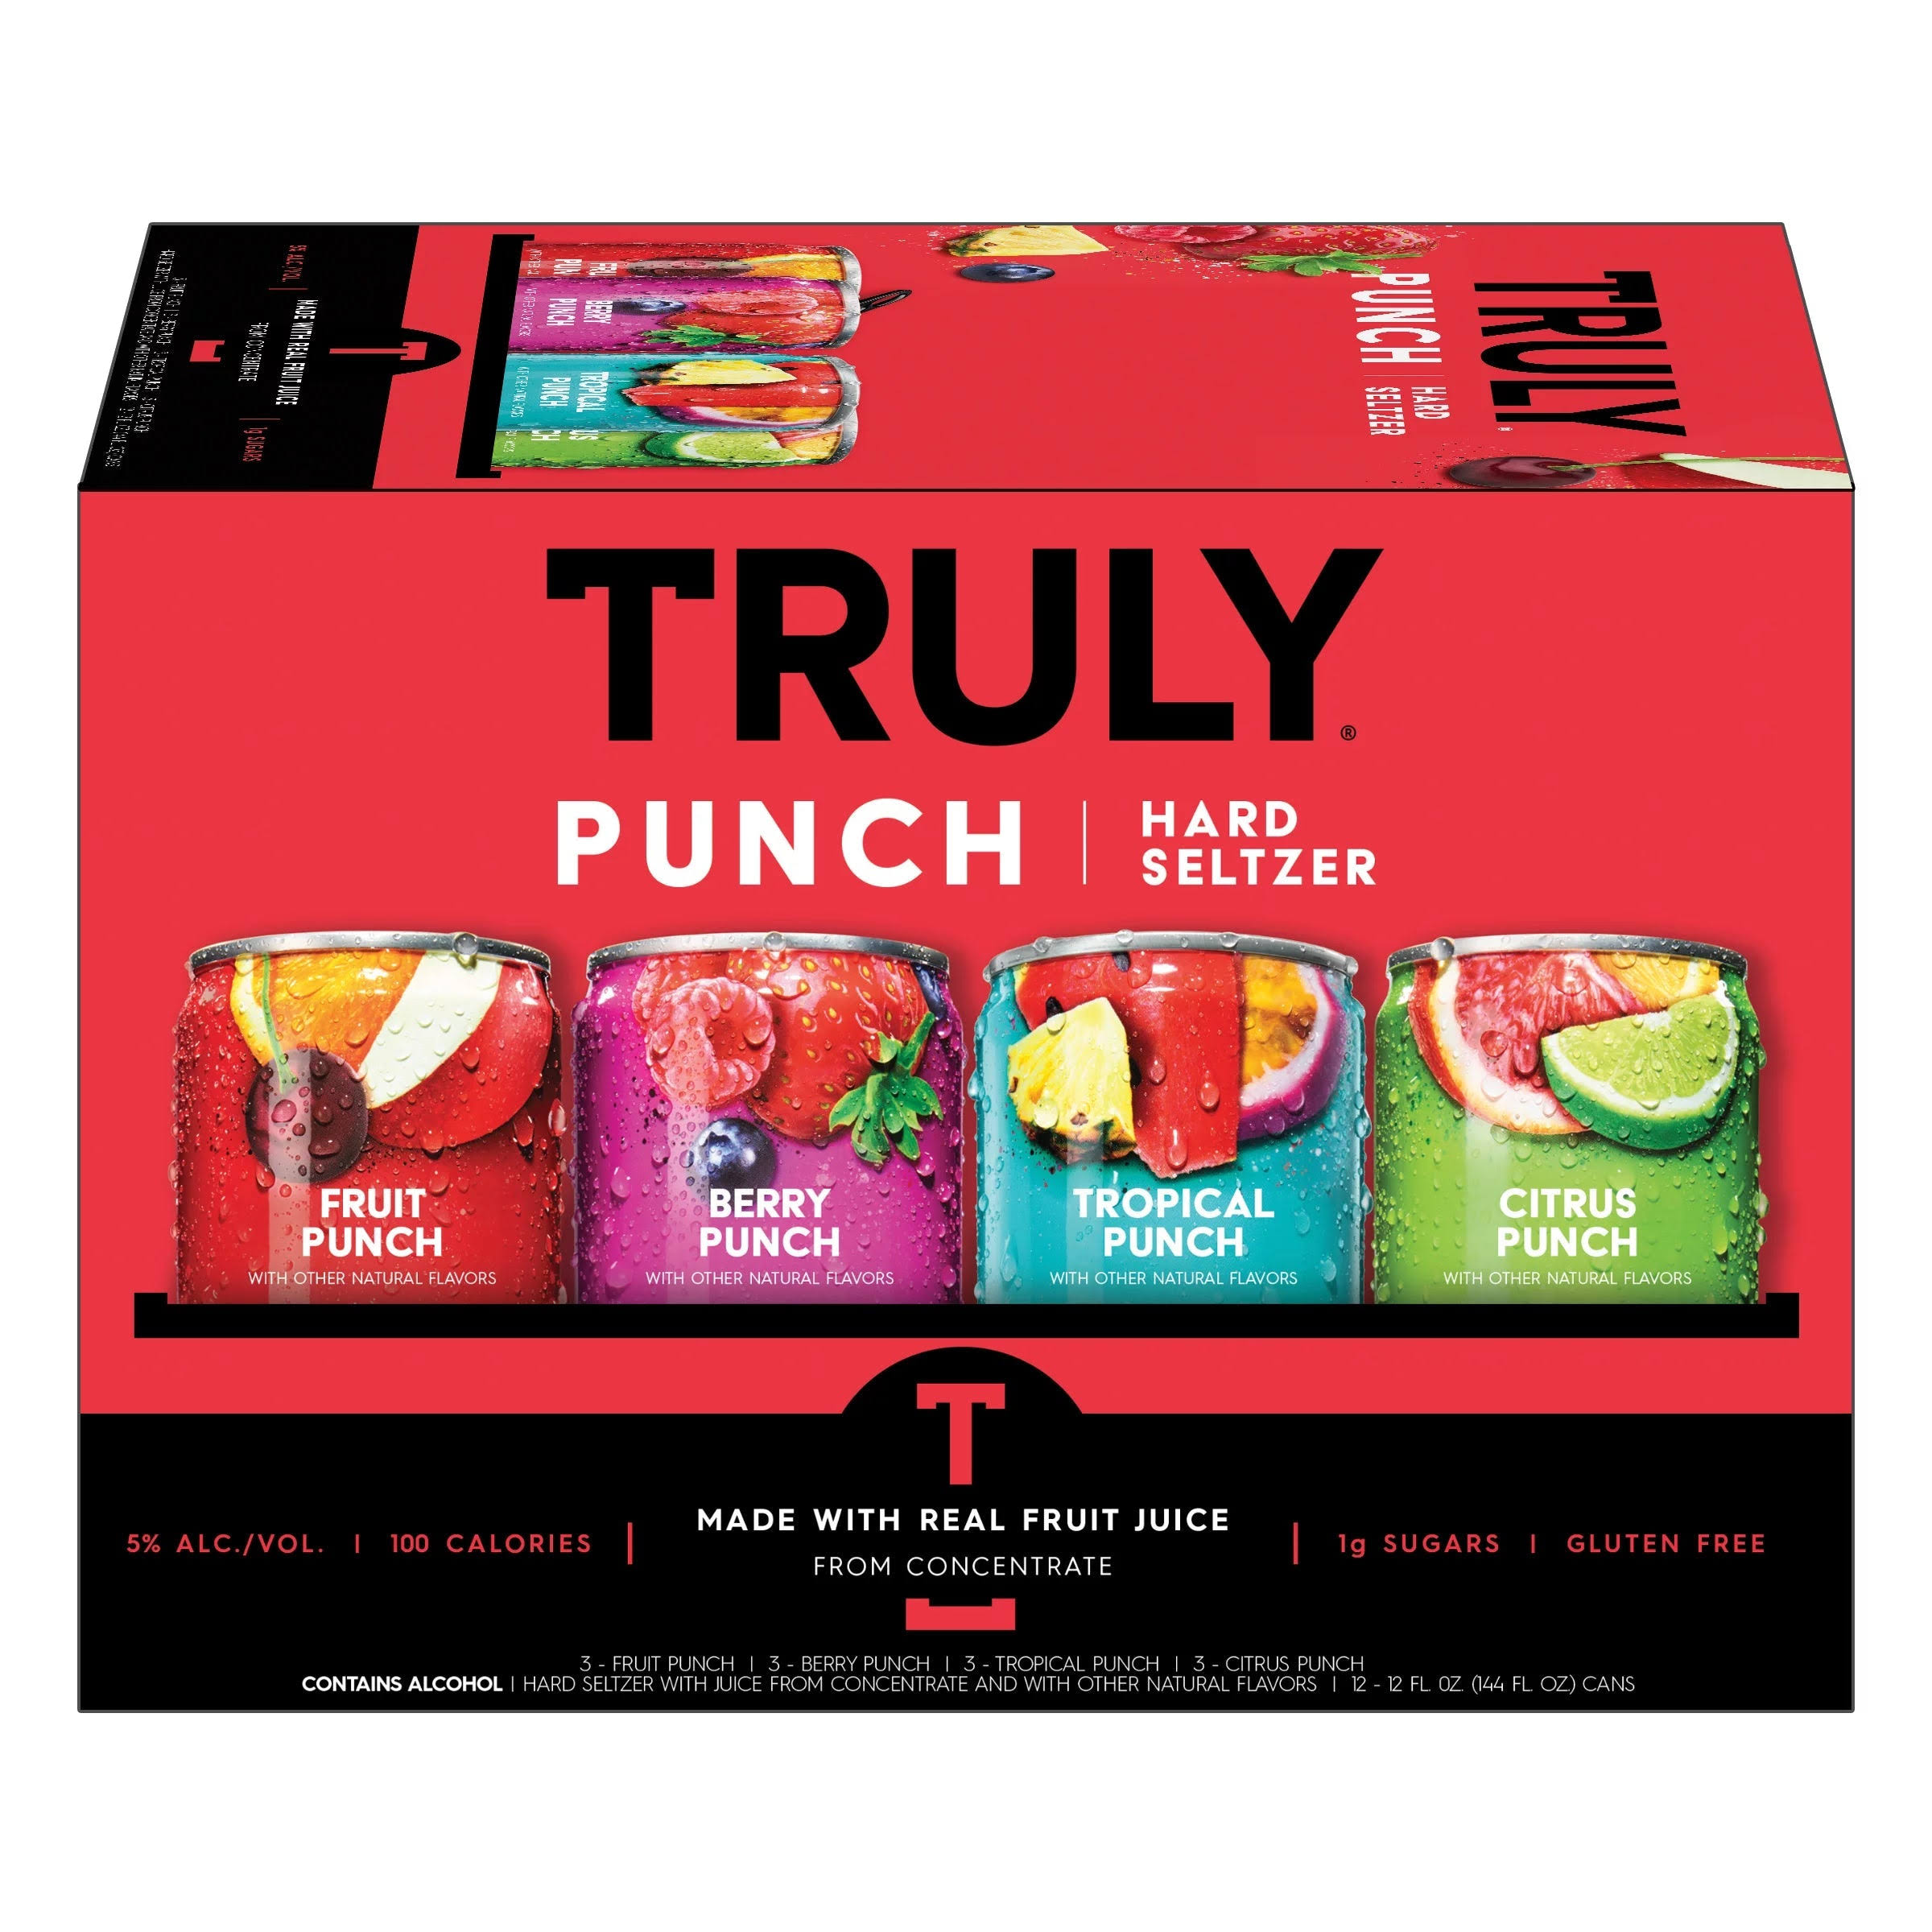 TRULY PUNCH HARD SELTZER VARIETY 12 CANS